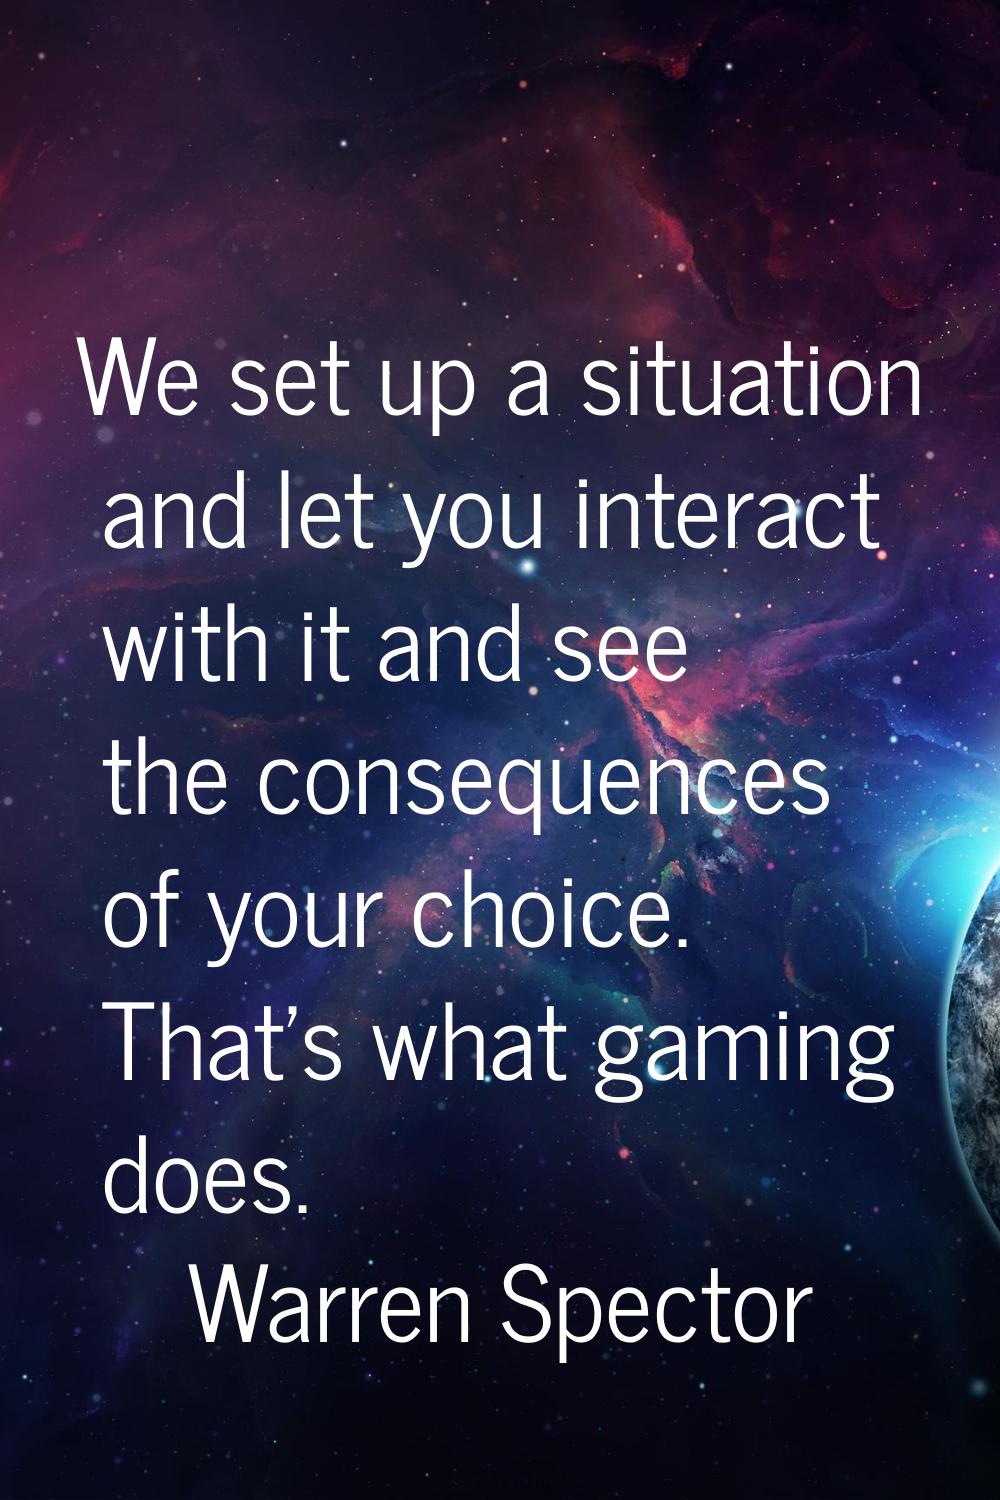 We set up a situation and let you interact with it and see the consequences of your choice. That's 